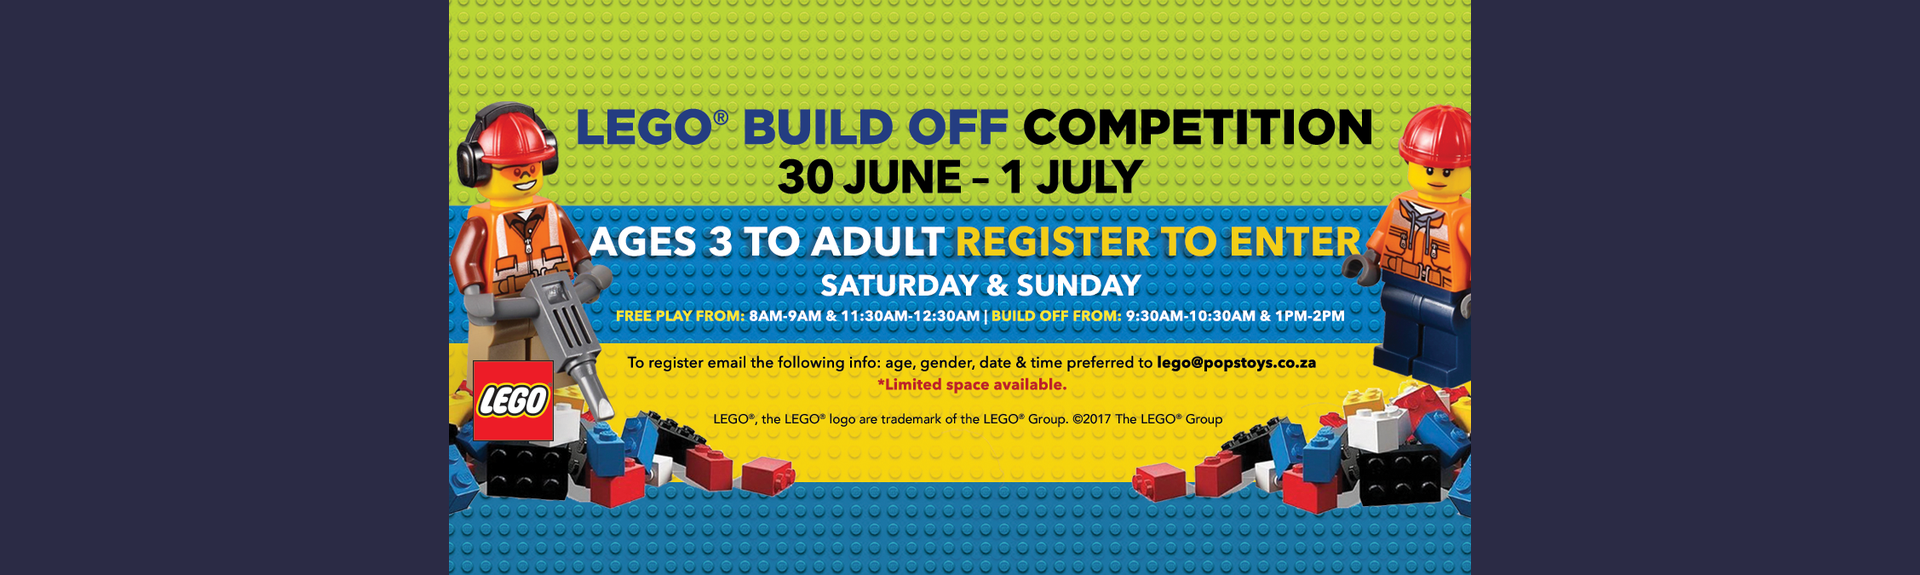 LEGO Build OFF Competition